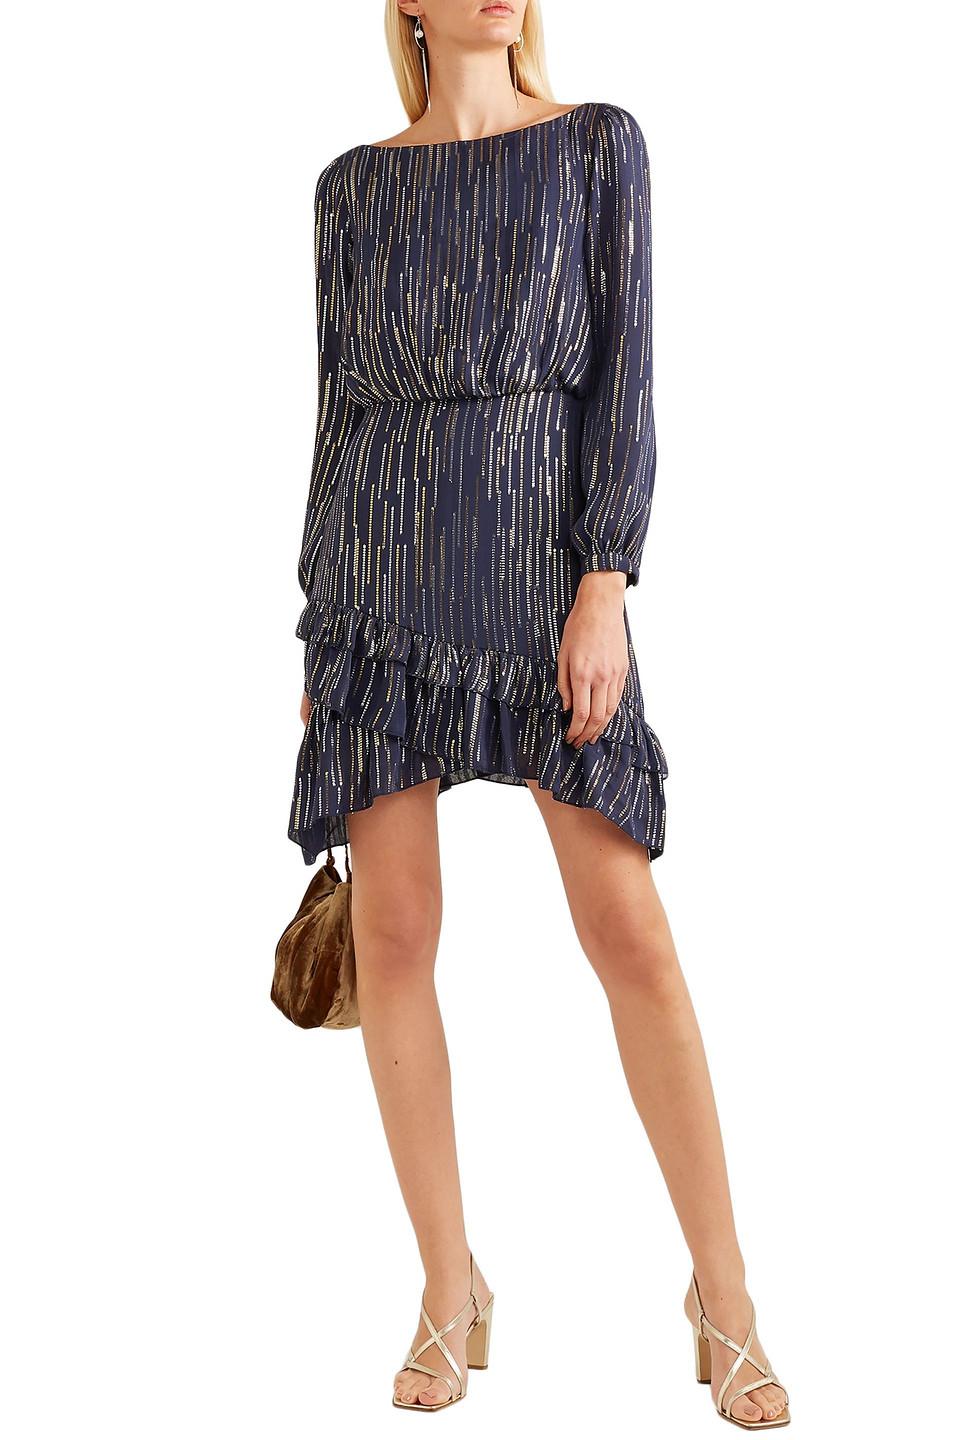 Saloni Felicia Ruffled Striped Silk And Lurex-blend Dress in Navy (Blue) -  Save 5% - Lyst